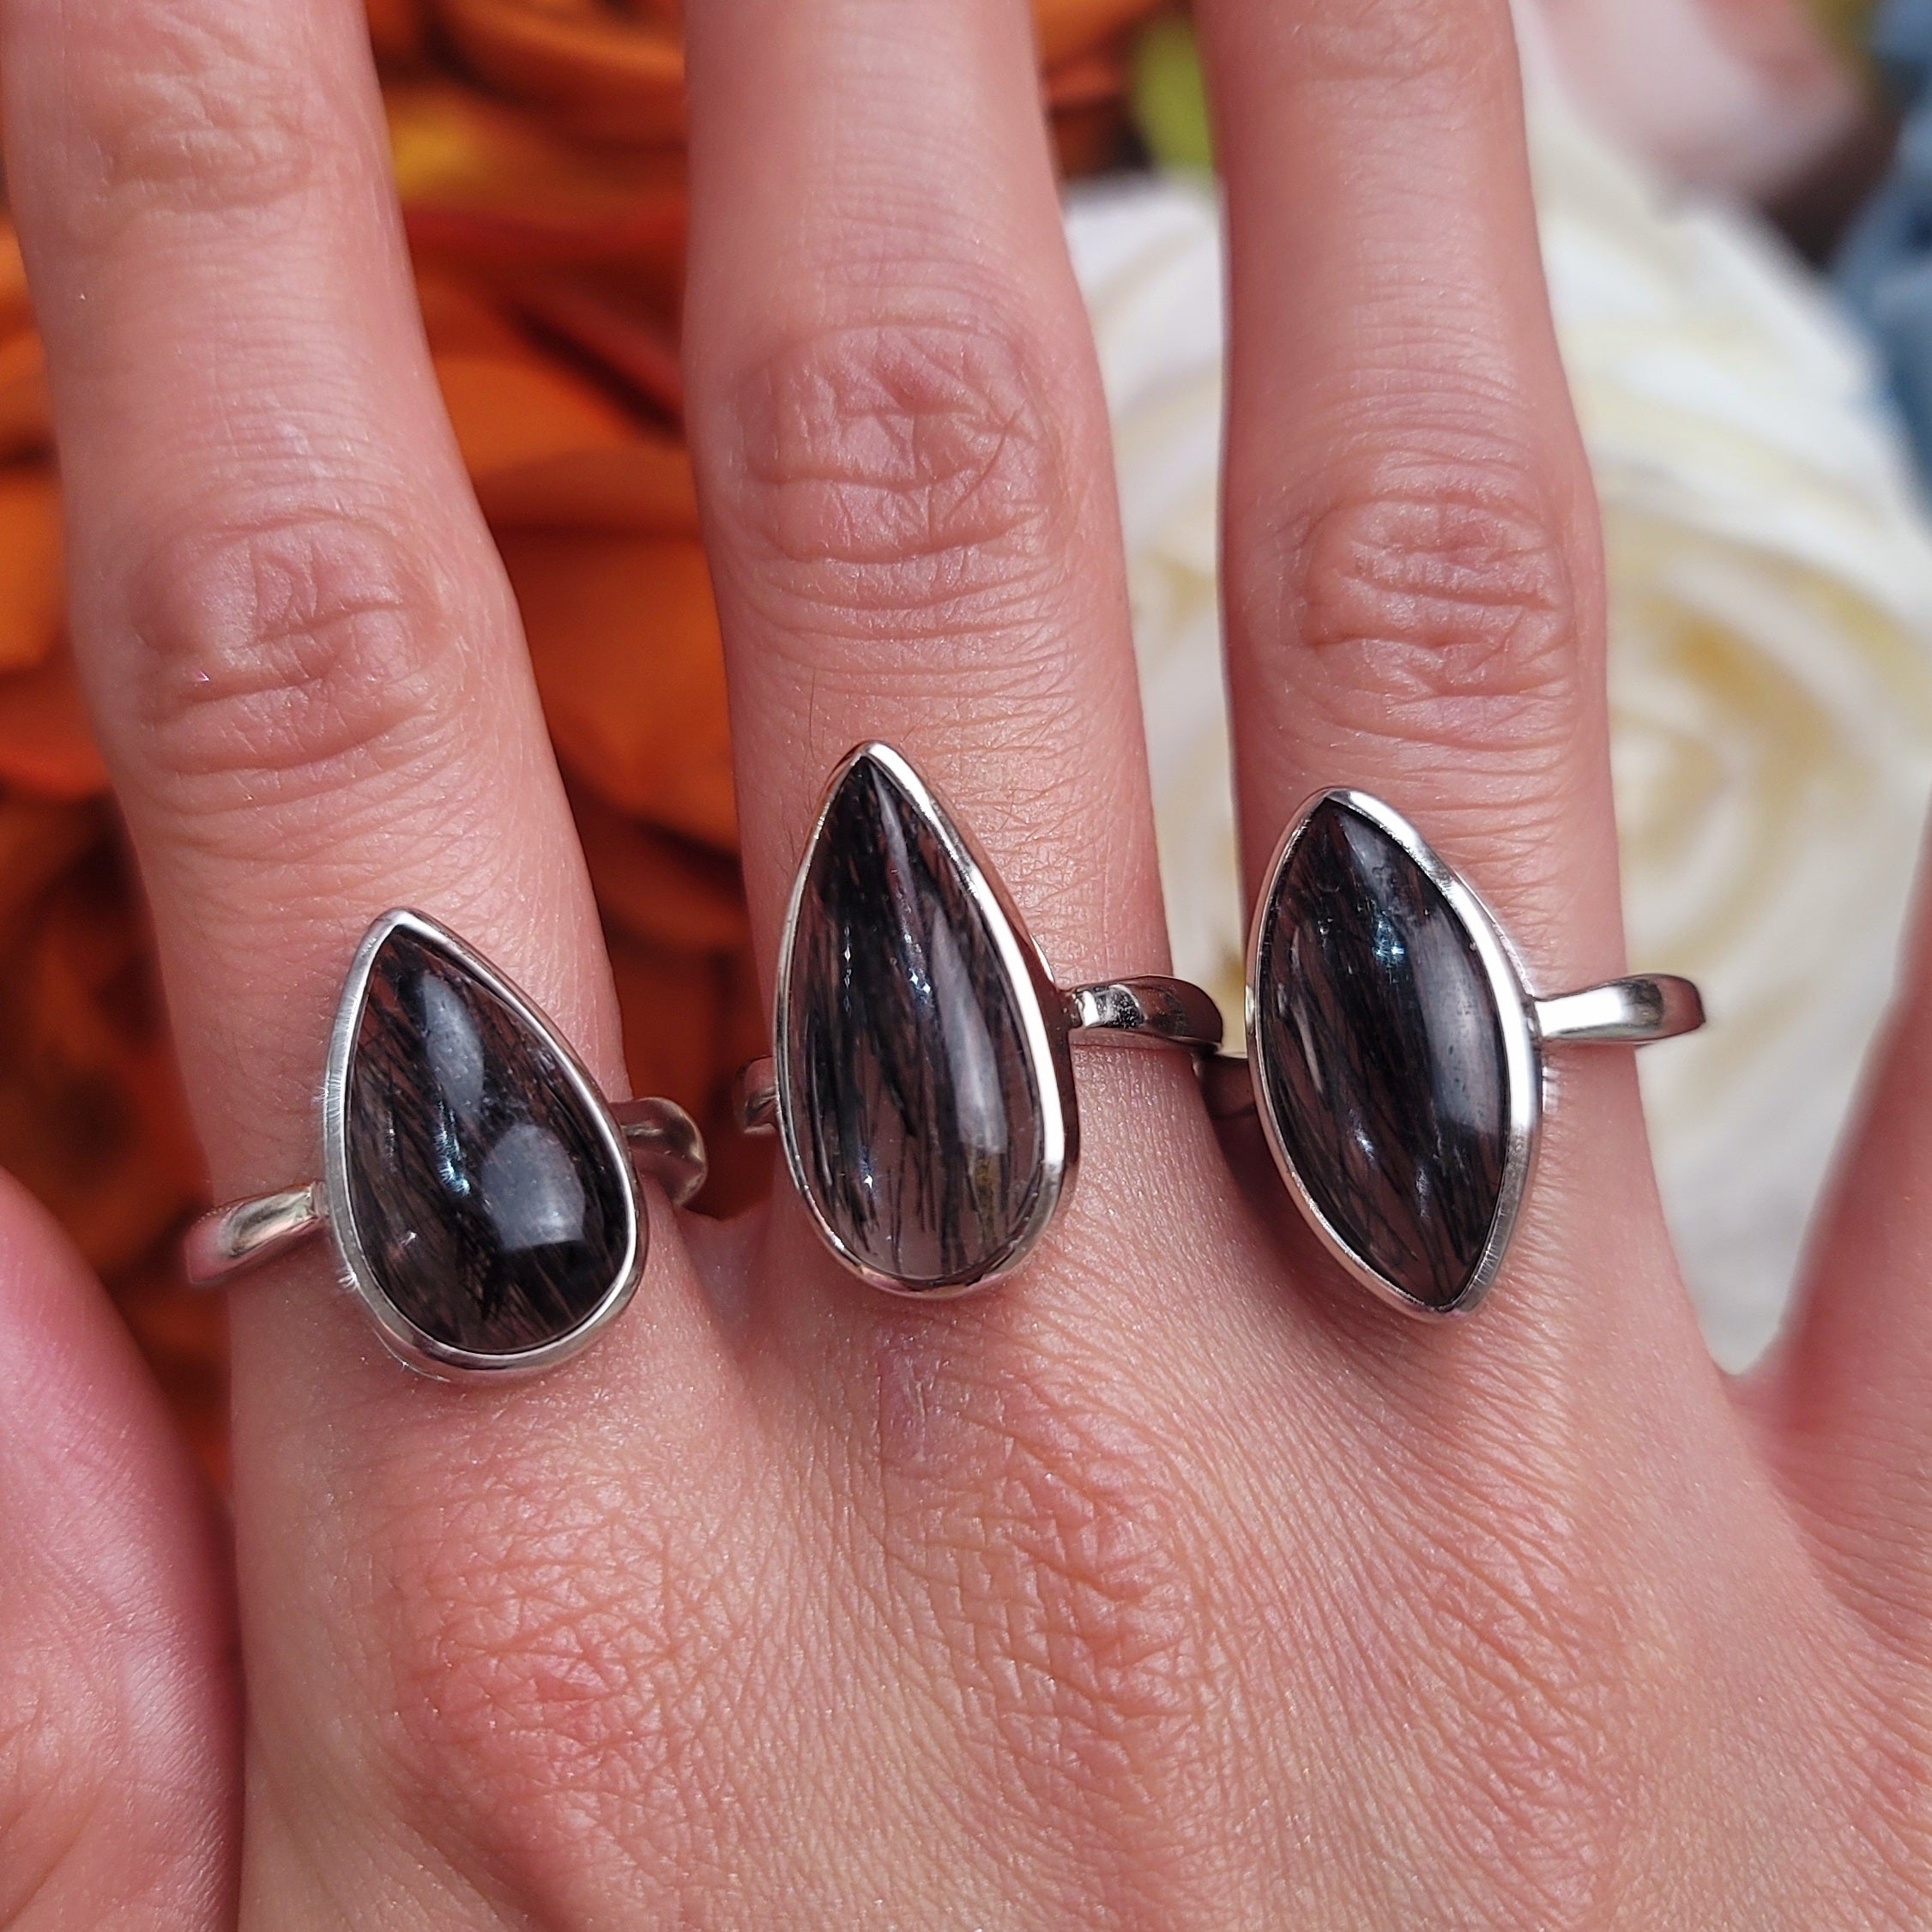 Black Tourmaline in Quartz Adjustable Ring .925 Silver for Amplified Protection